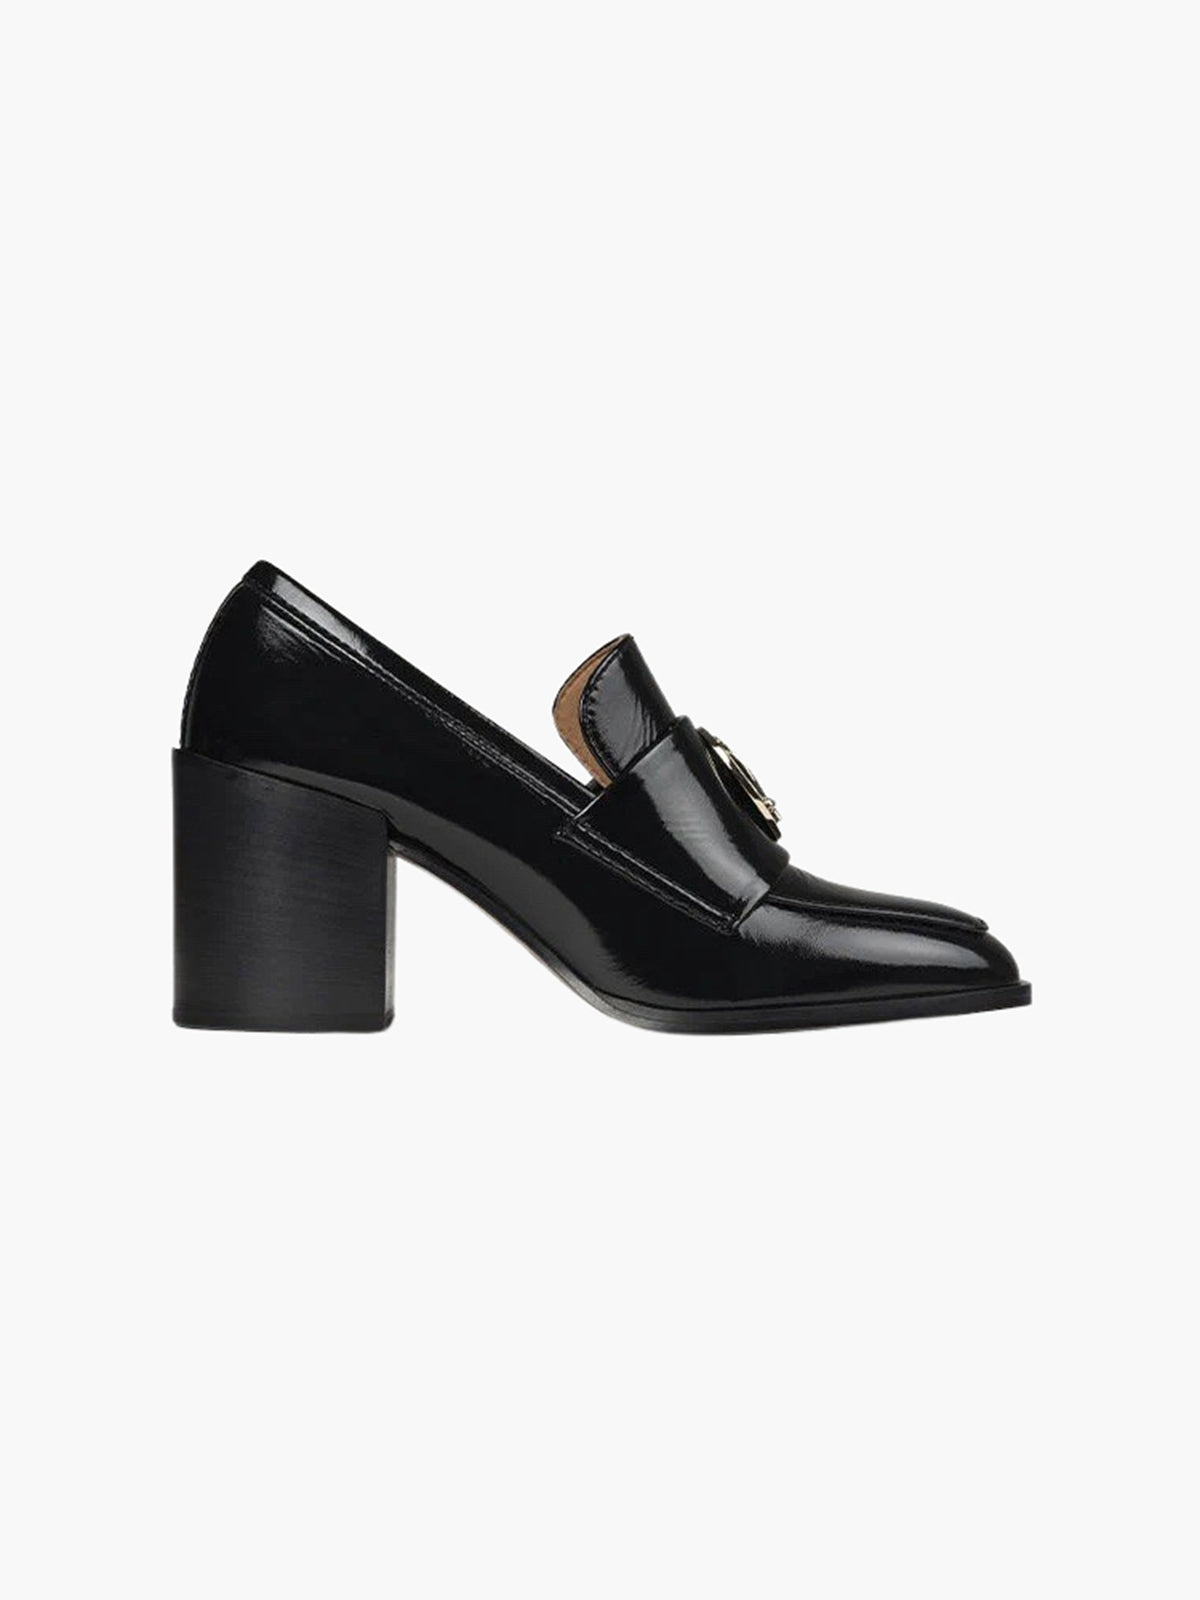 Trench Loafers | Black